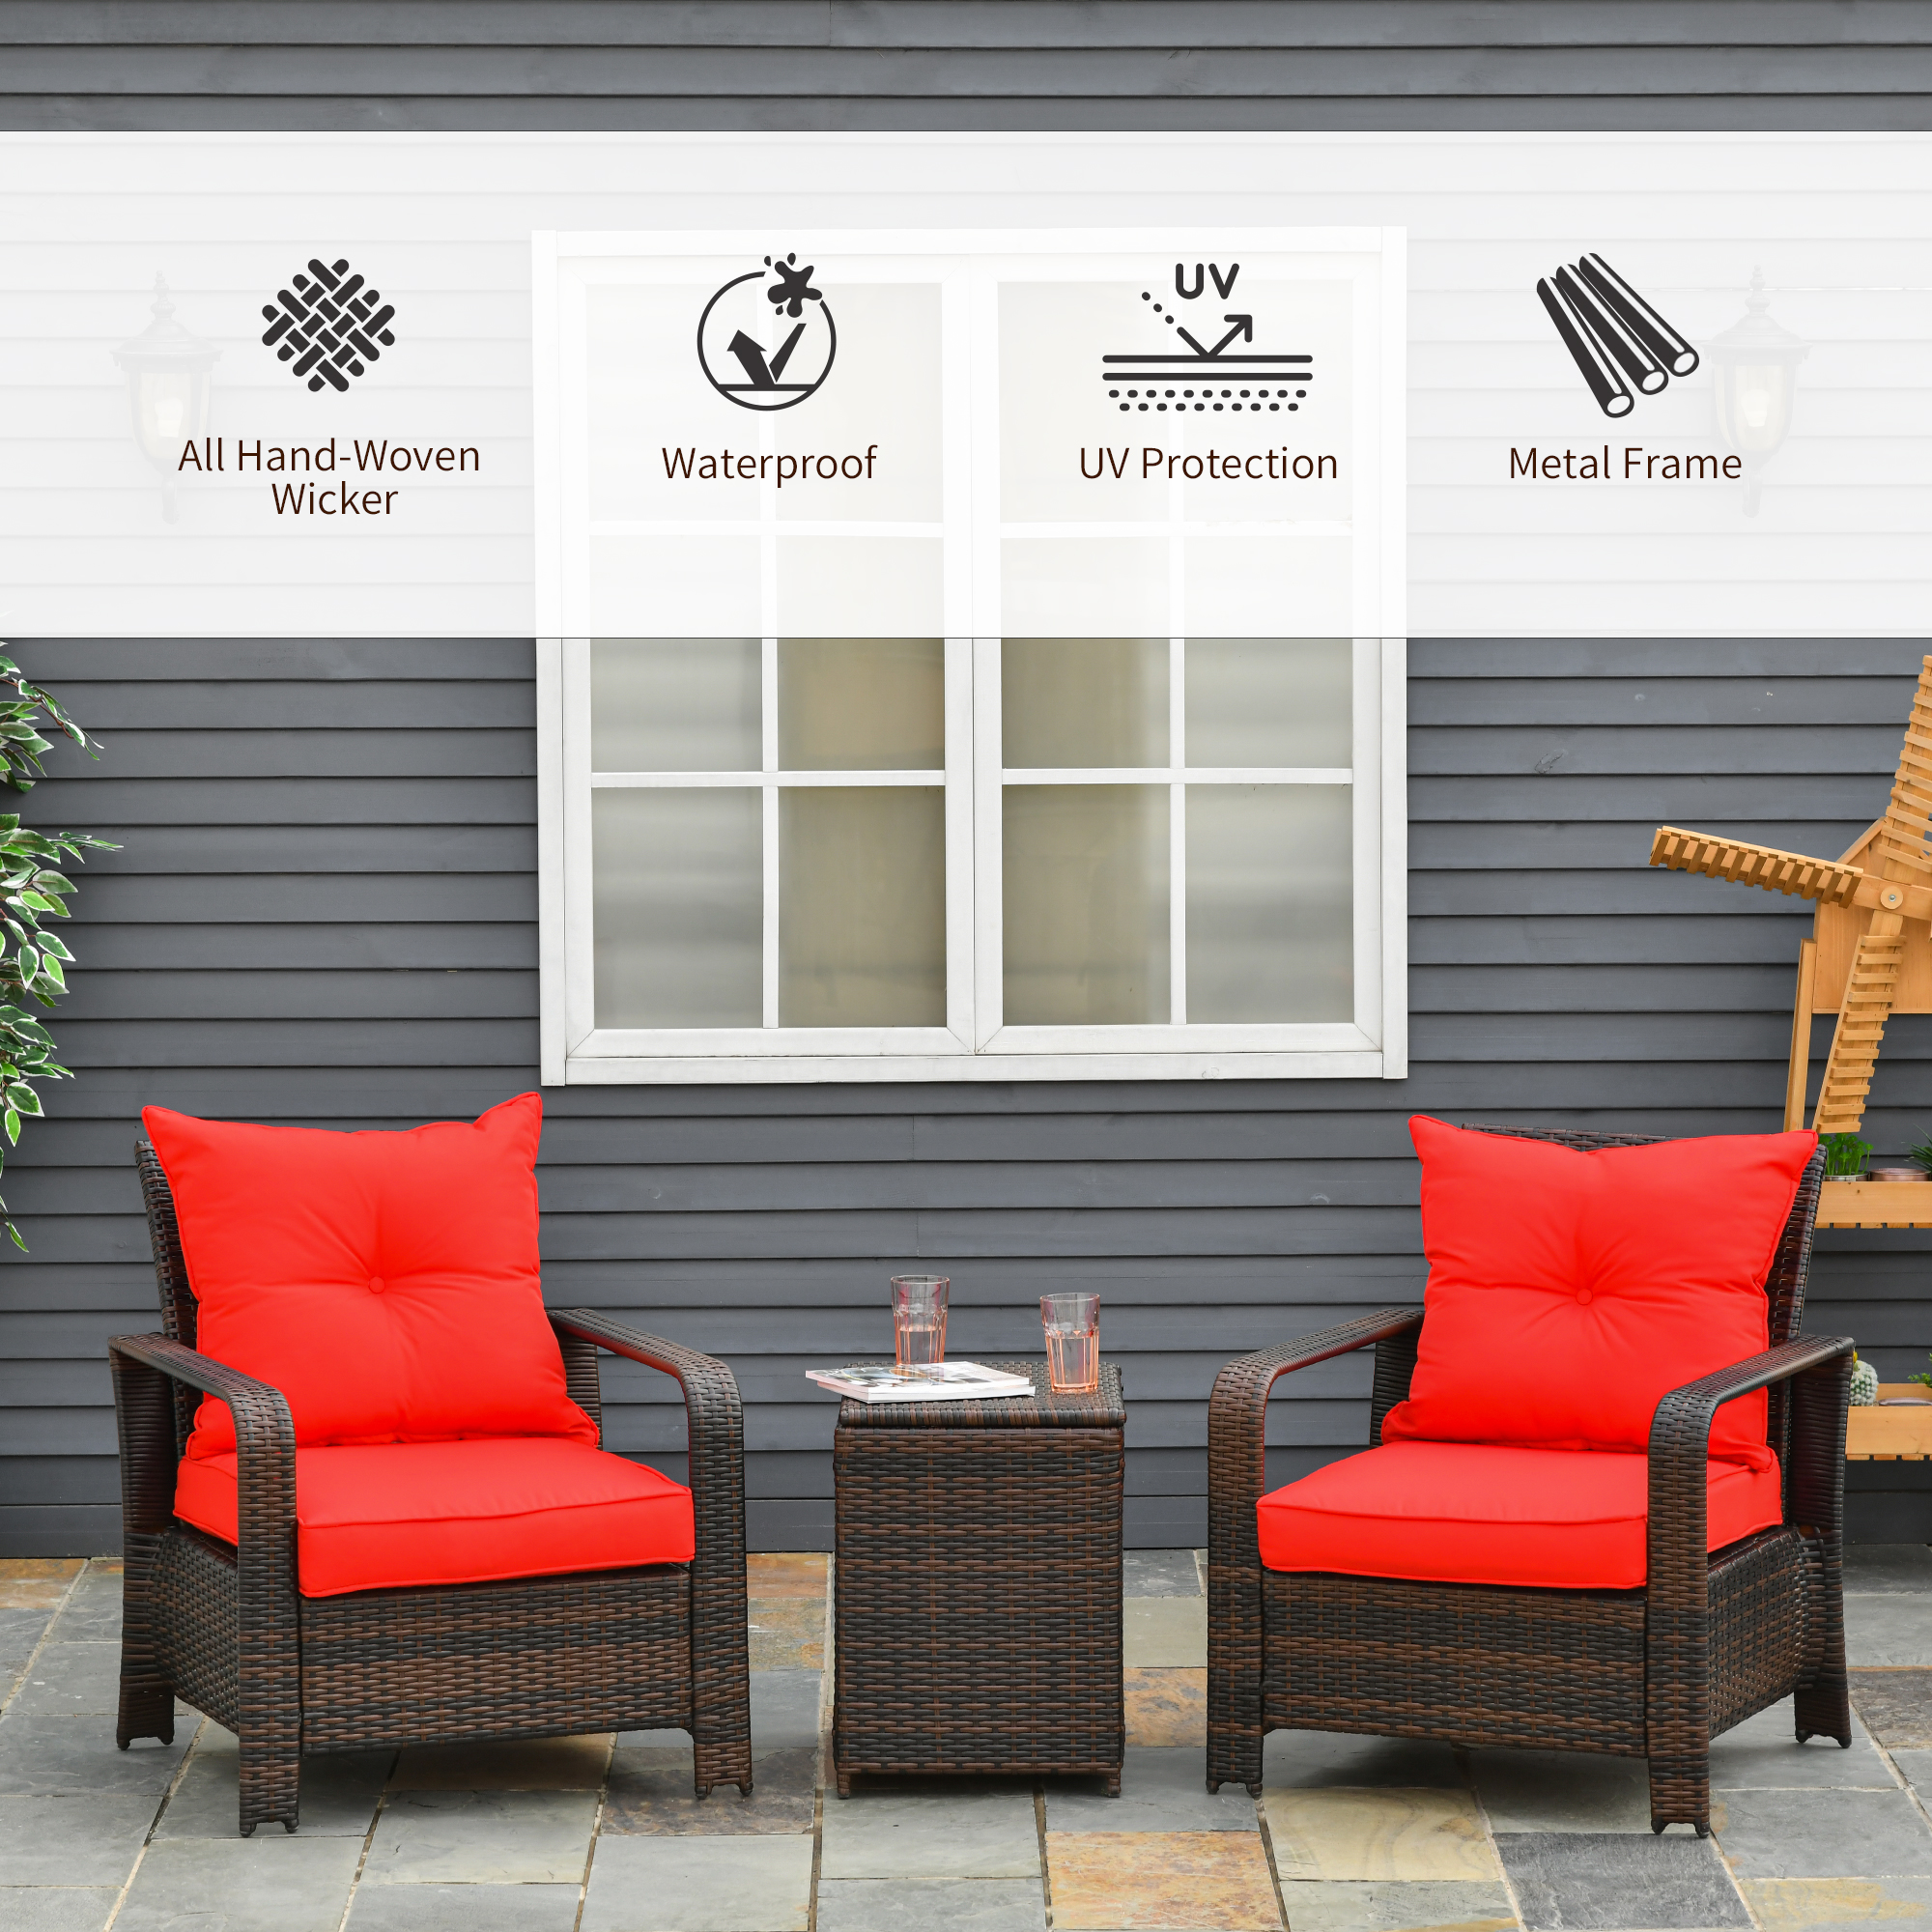 Outsunny 3 Piece Patio Furniture Set, PE Wicker Storage Table & Chairs, Red - image 3 of 9